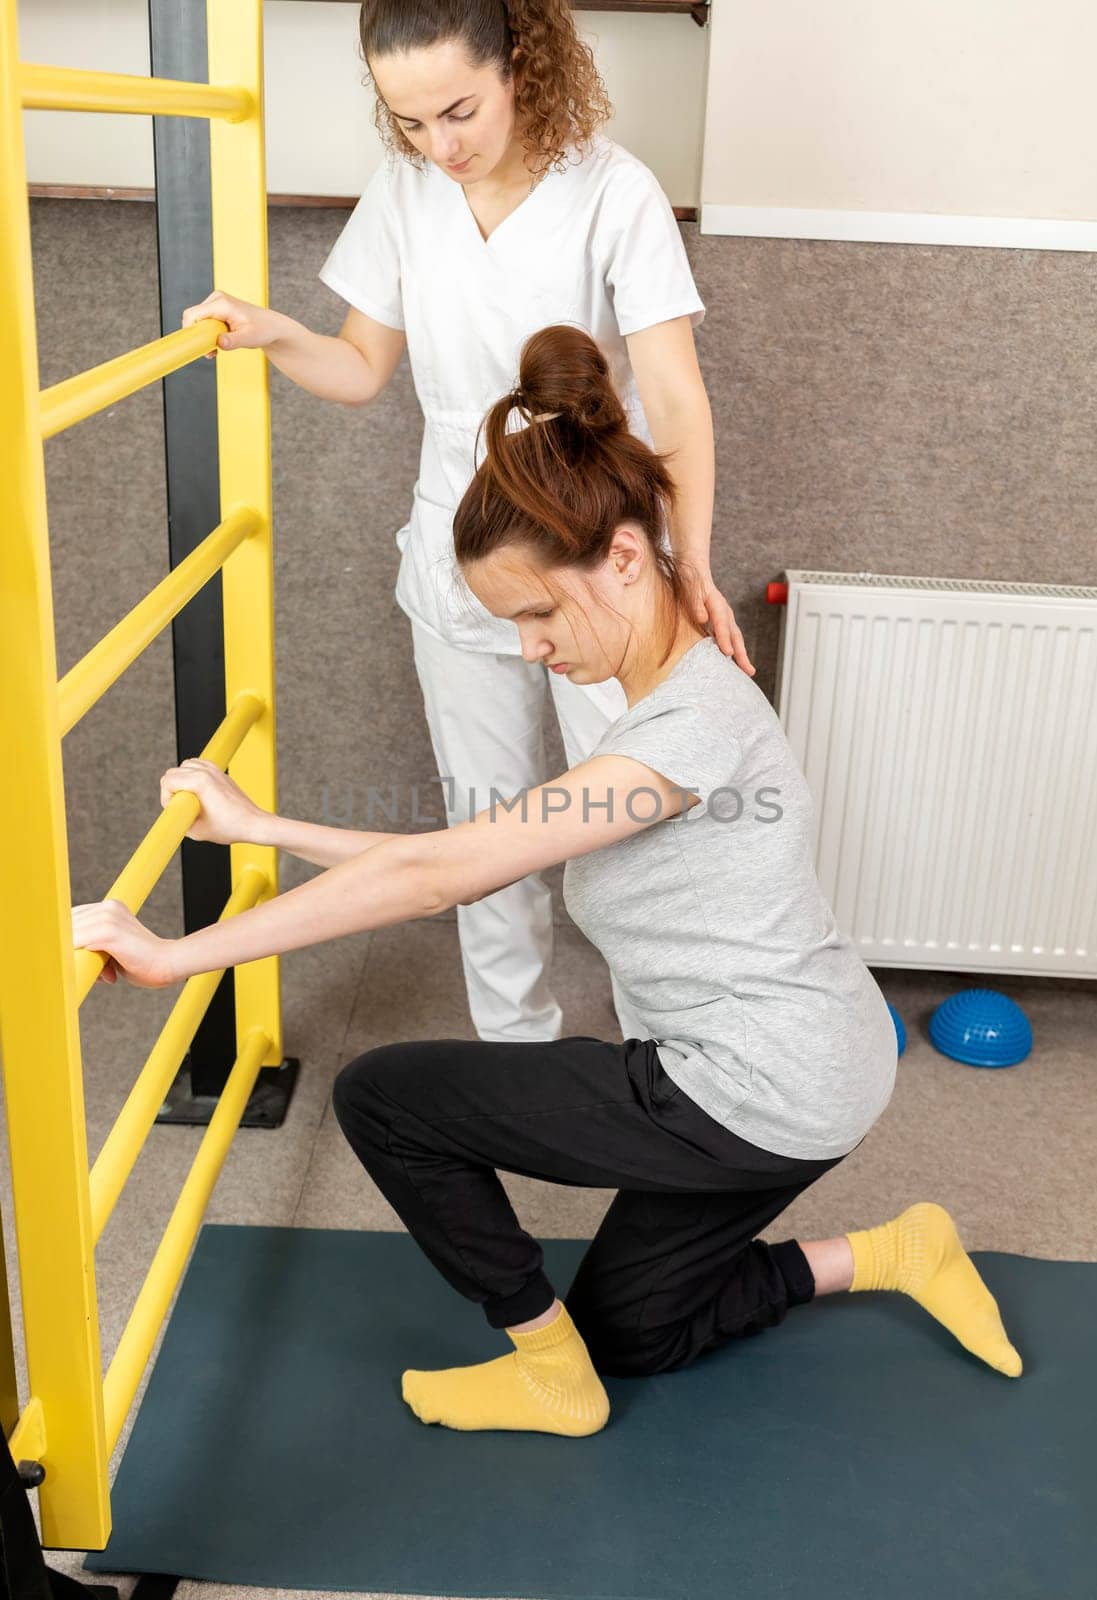 Disabled Child With Physician Does Physical Exercises In Gym. Kid With Special Needs. Rehabilitation. Cerebral Palsy. Motor Disorder. Vertical plane. High quality photo